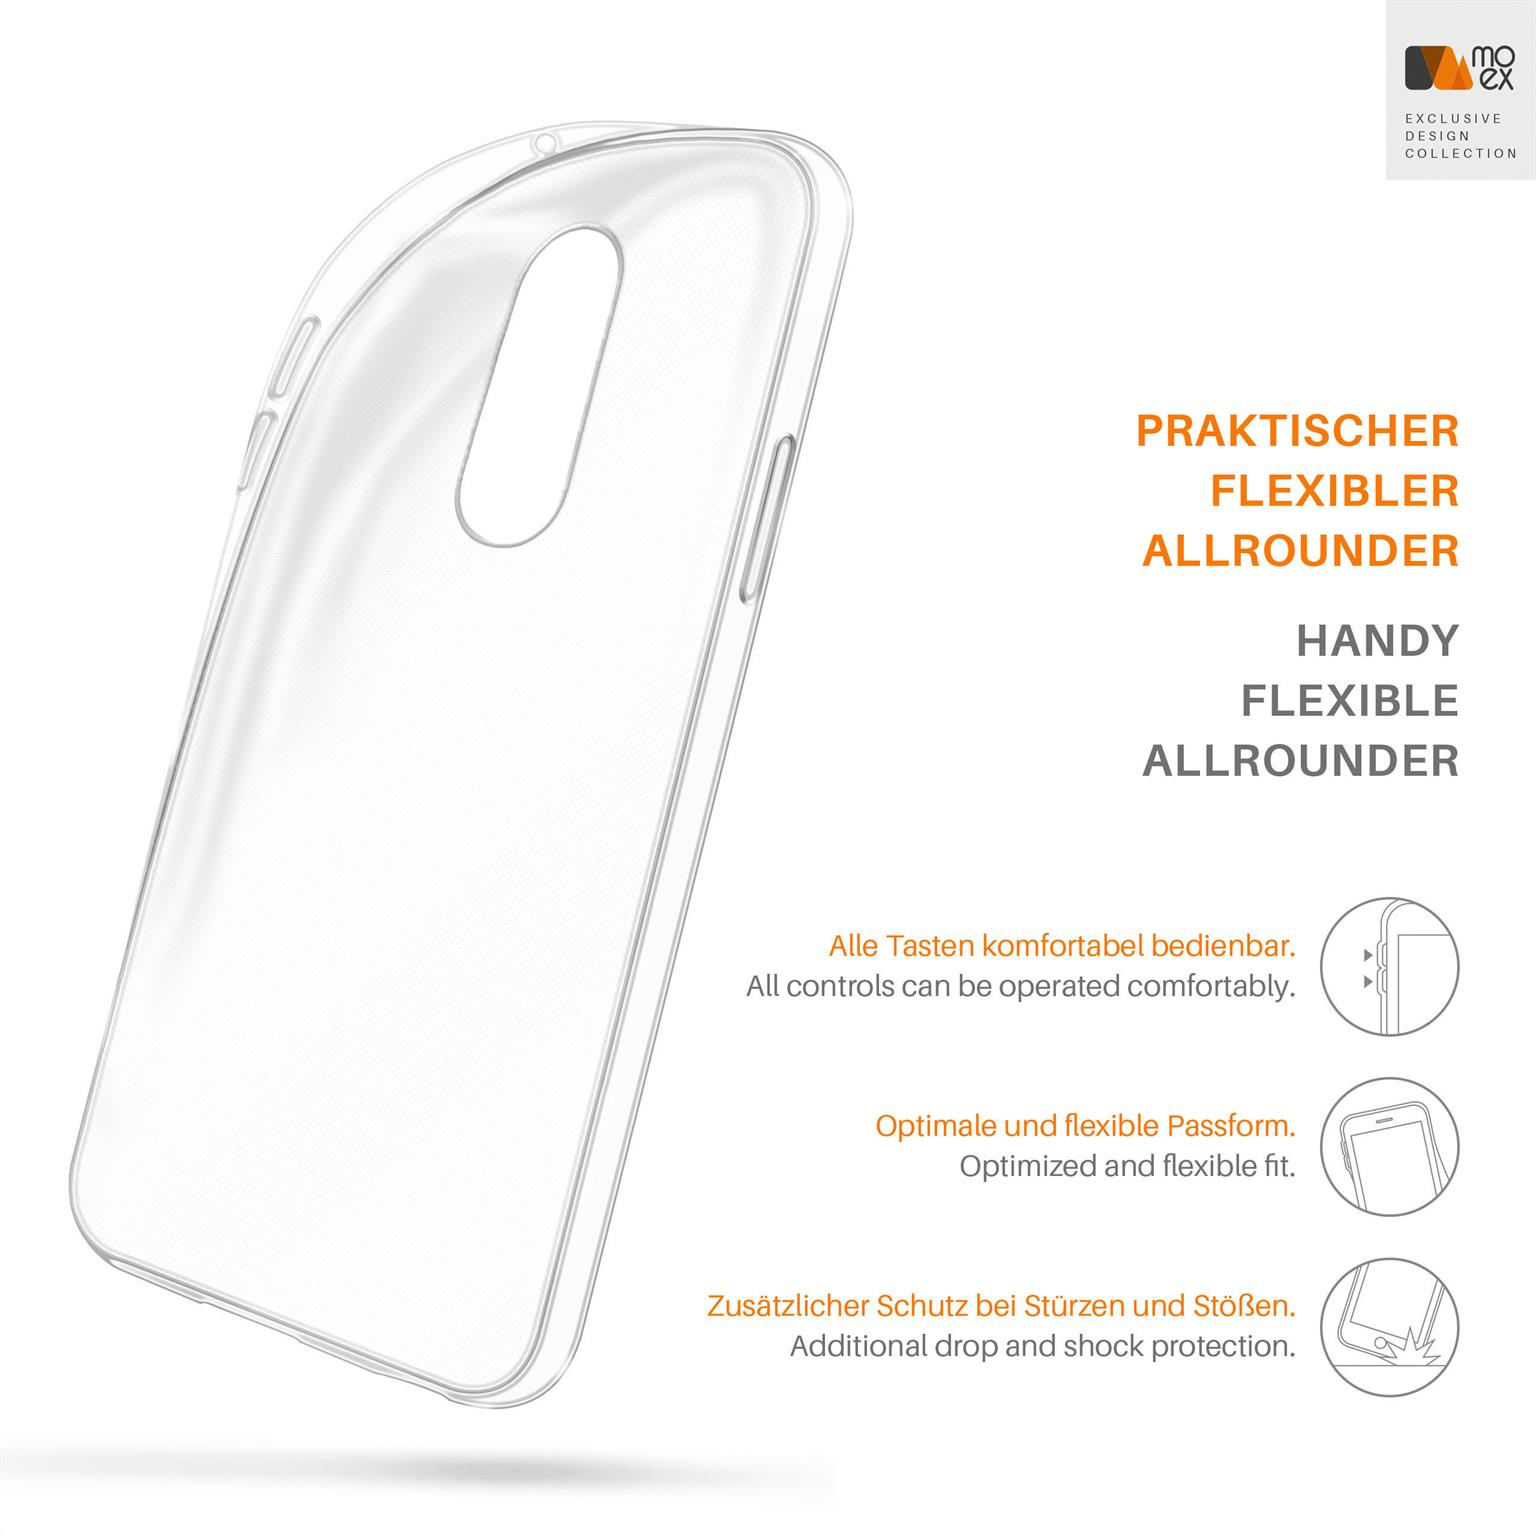 Case, Backcover, 7 OnePlus, Aero Crystal-Clear Pro, MOEX